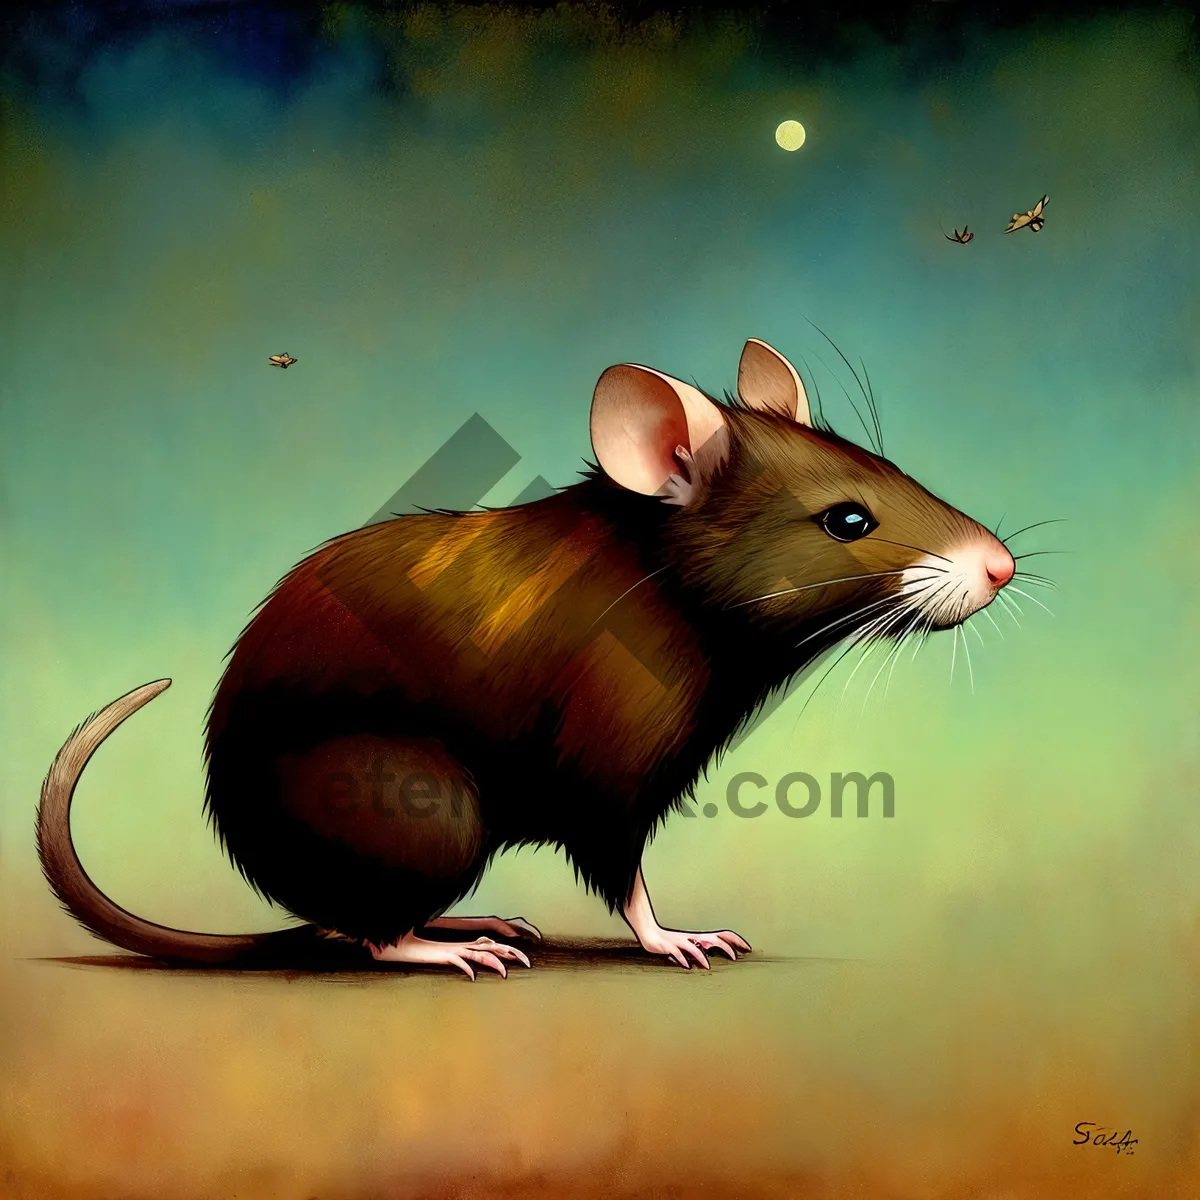 Picture of Fluffy Brown Mouse with Whiskers - Cute Rodent Pet